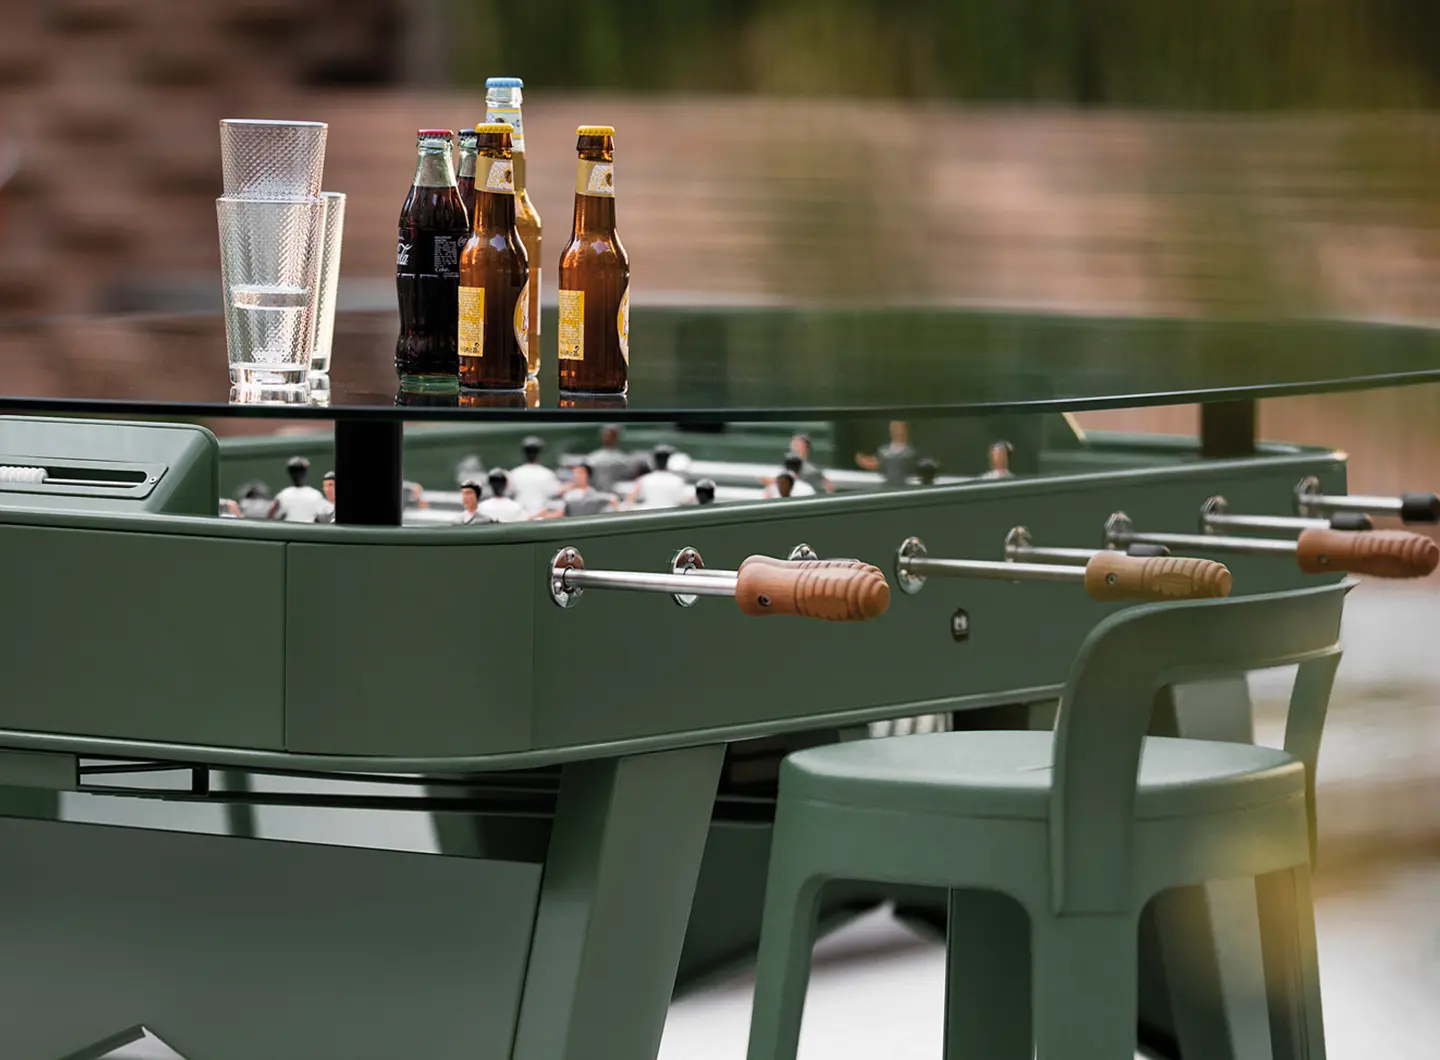 RS Barcelona RS2 football dining table